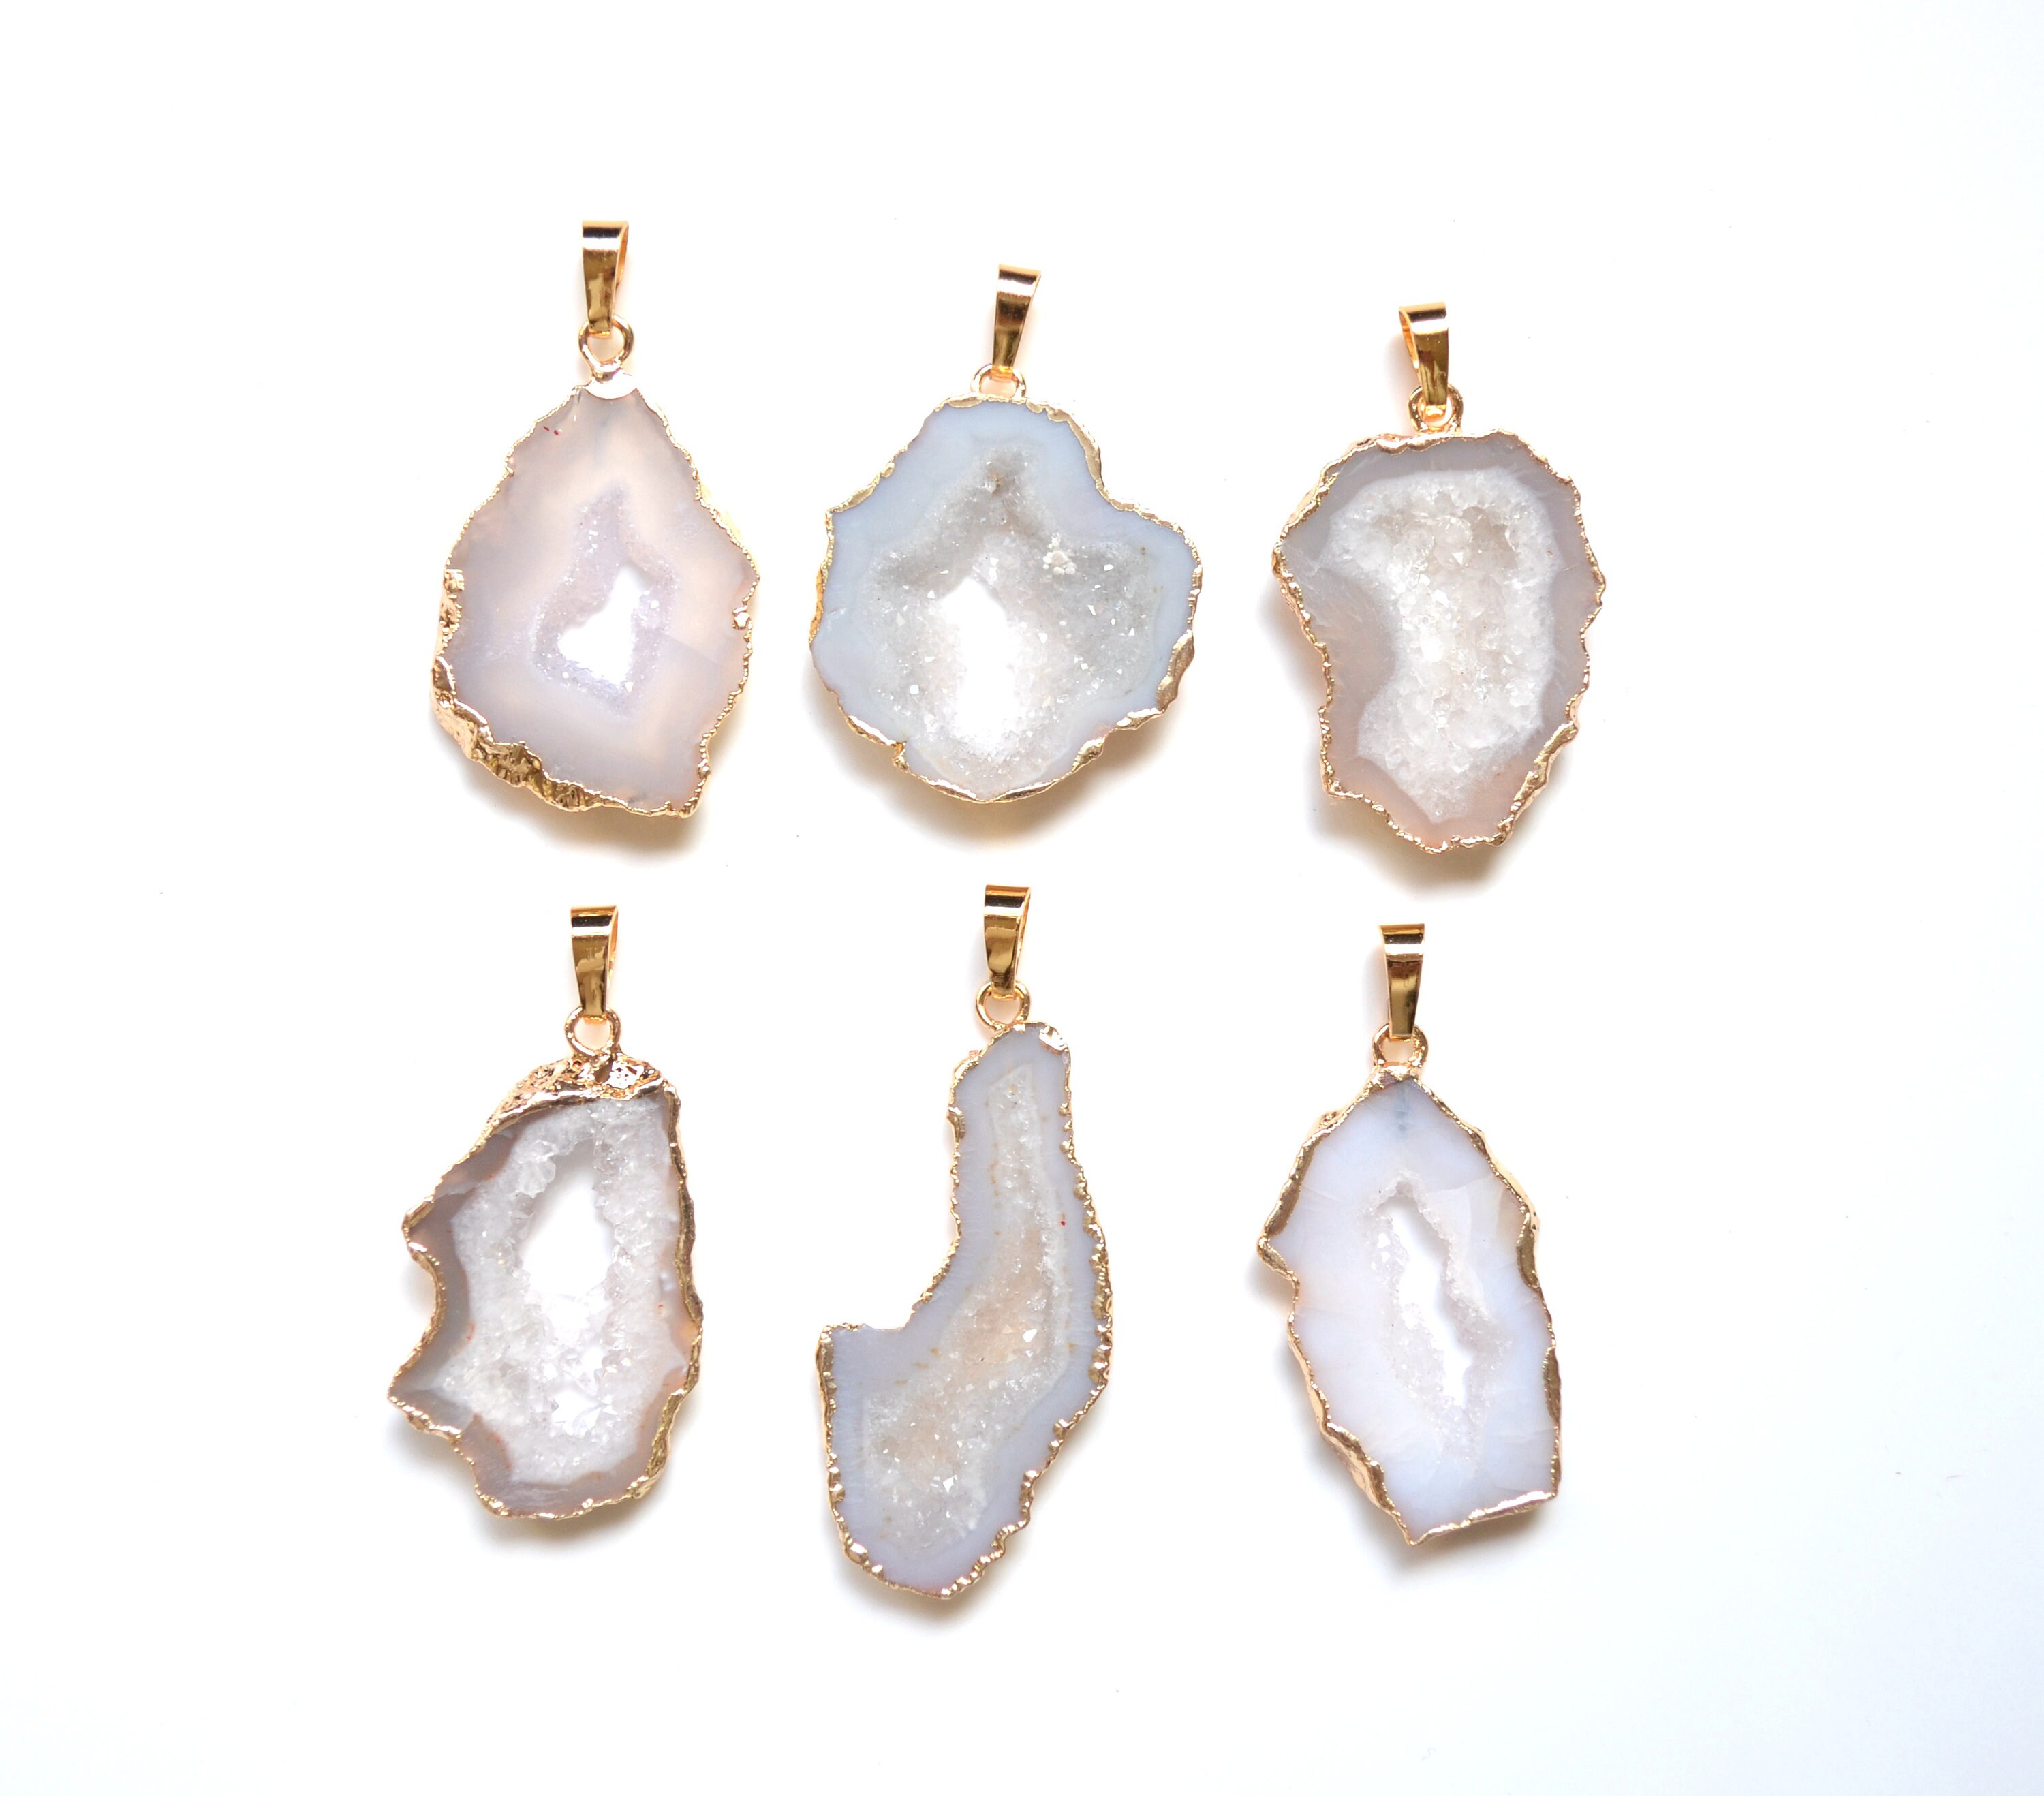 Small Size Nature White Druzy Pendant gold Plated Agate Geode - Etsy